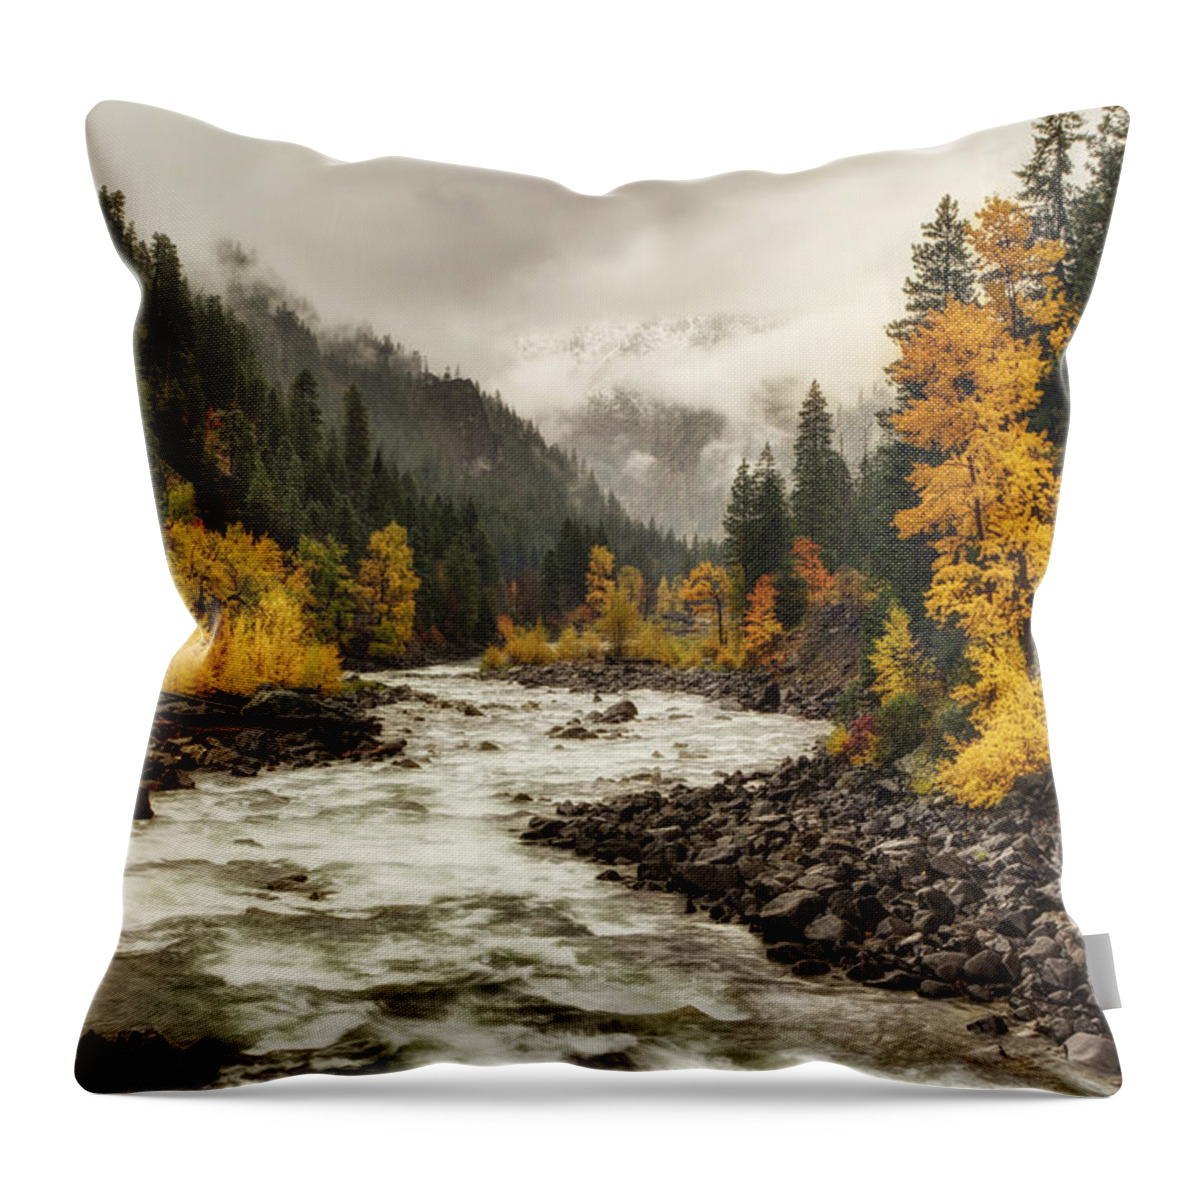 Autumn Throw Pillow featuring the photograph Flowing through Autumn by Mark Kiver